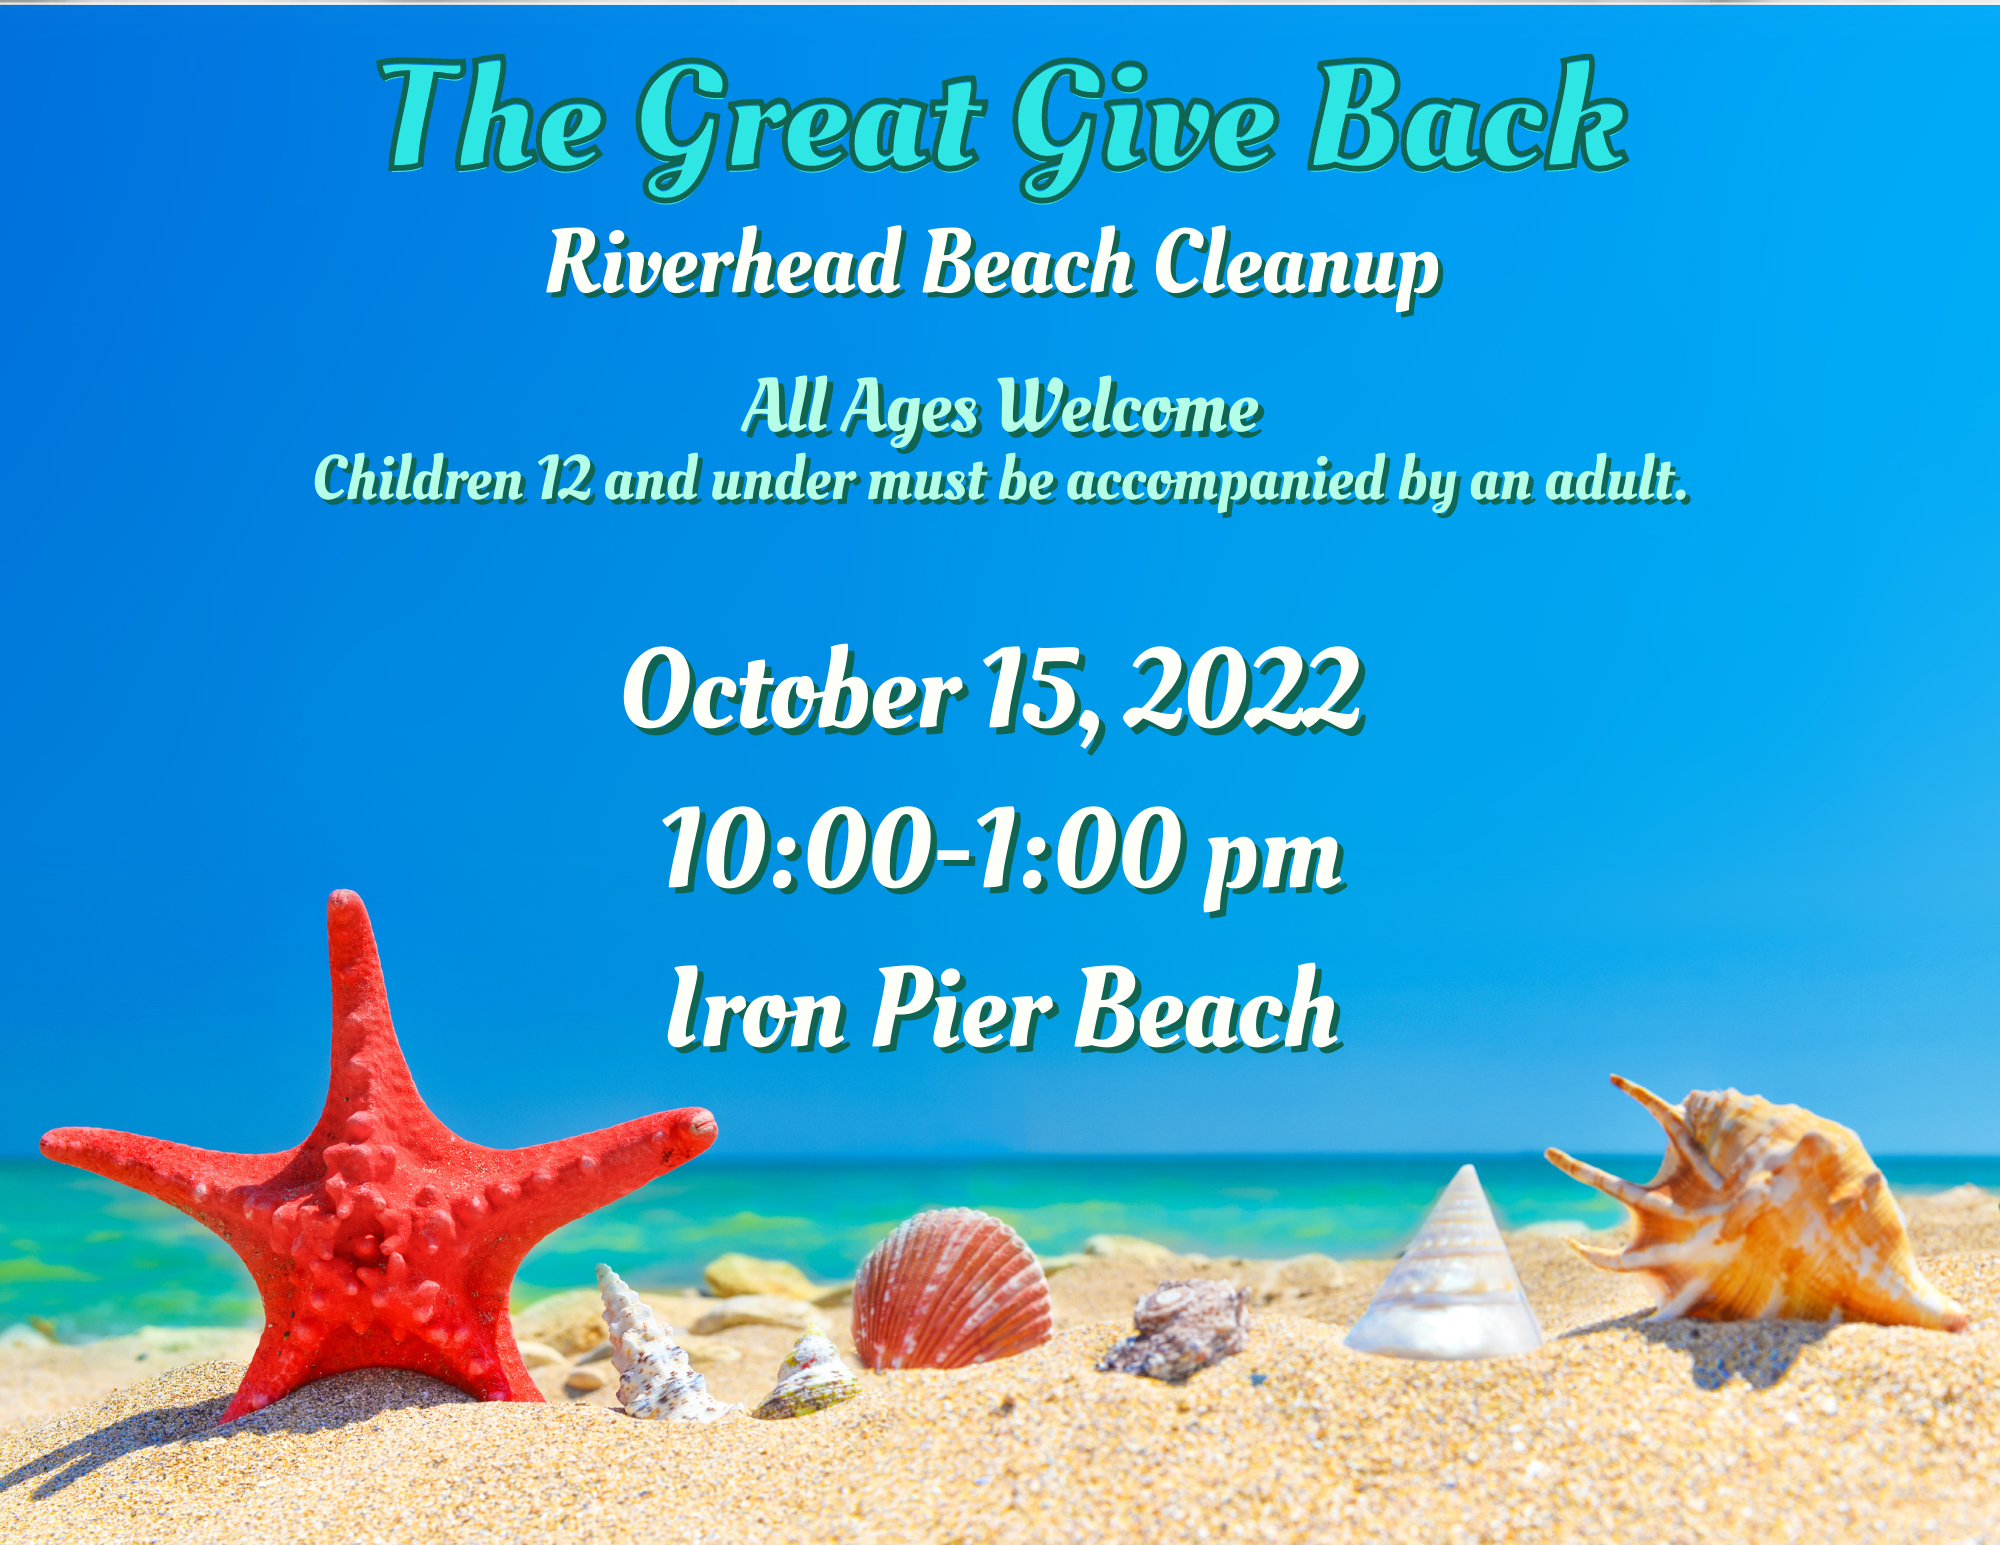 Program flyer featuring a beach, followed by the following text, "The Great Give Back. Riverhead Beach Cleanup. All ages welcome, children 12 and under must be accompanied by an adult. October 15, 2022. 10:00am-1:00pm. Iron Pier Beach."